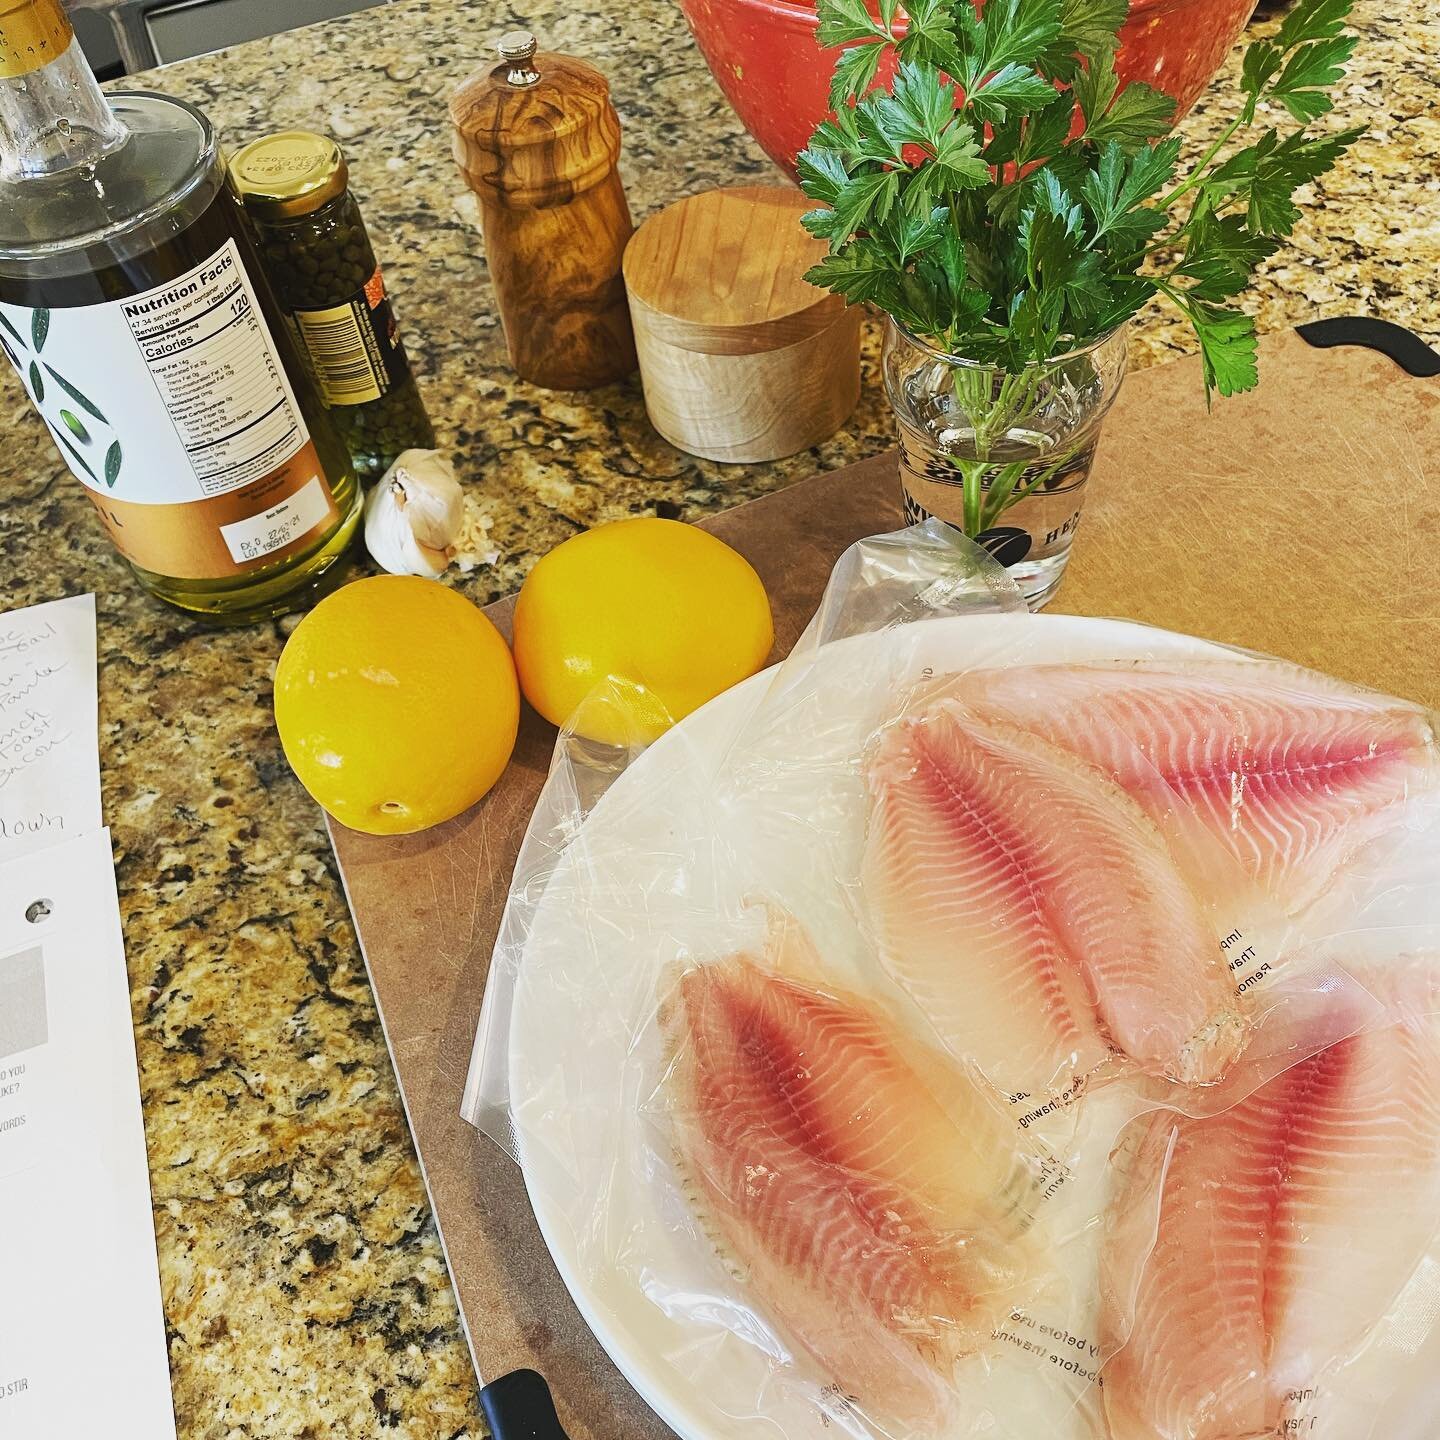 Getting ready to cook Grilled Talapia with Lemon and Capers! #privatecookinglessons #kidswithautismcan #herefishyfishy #sensorycooking